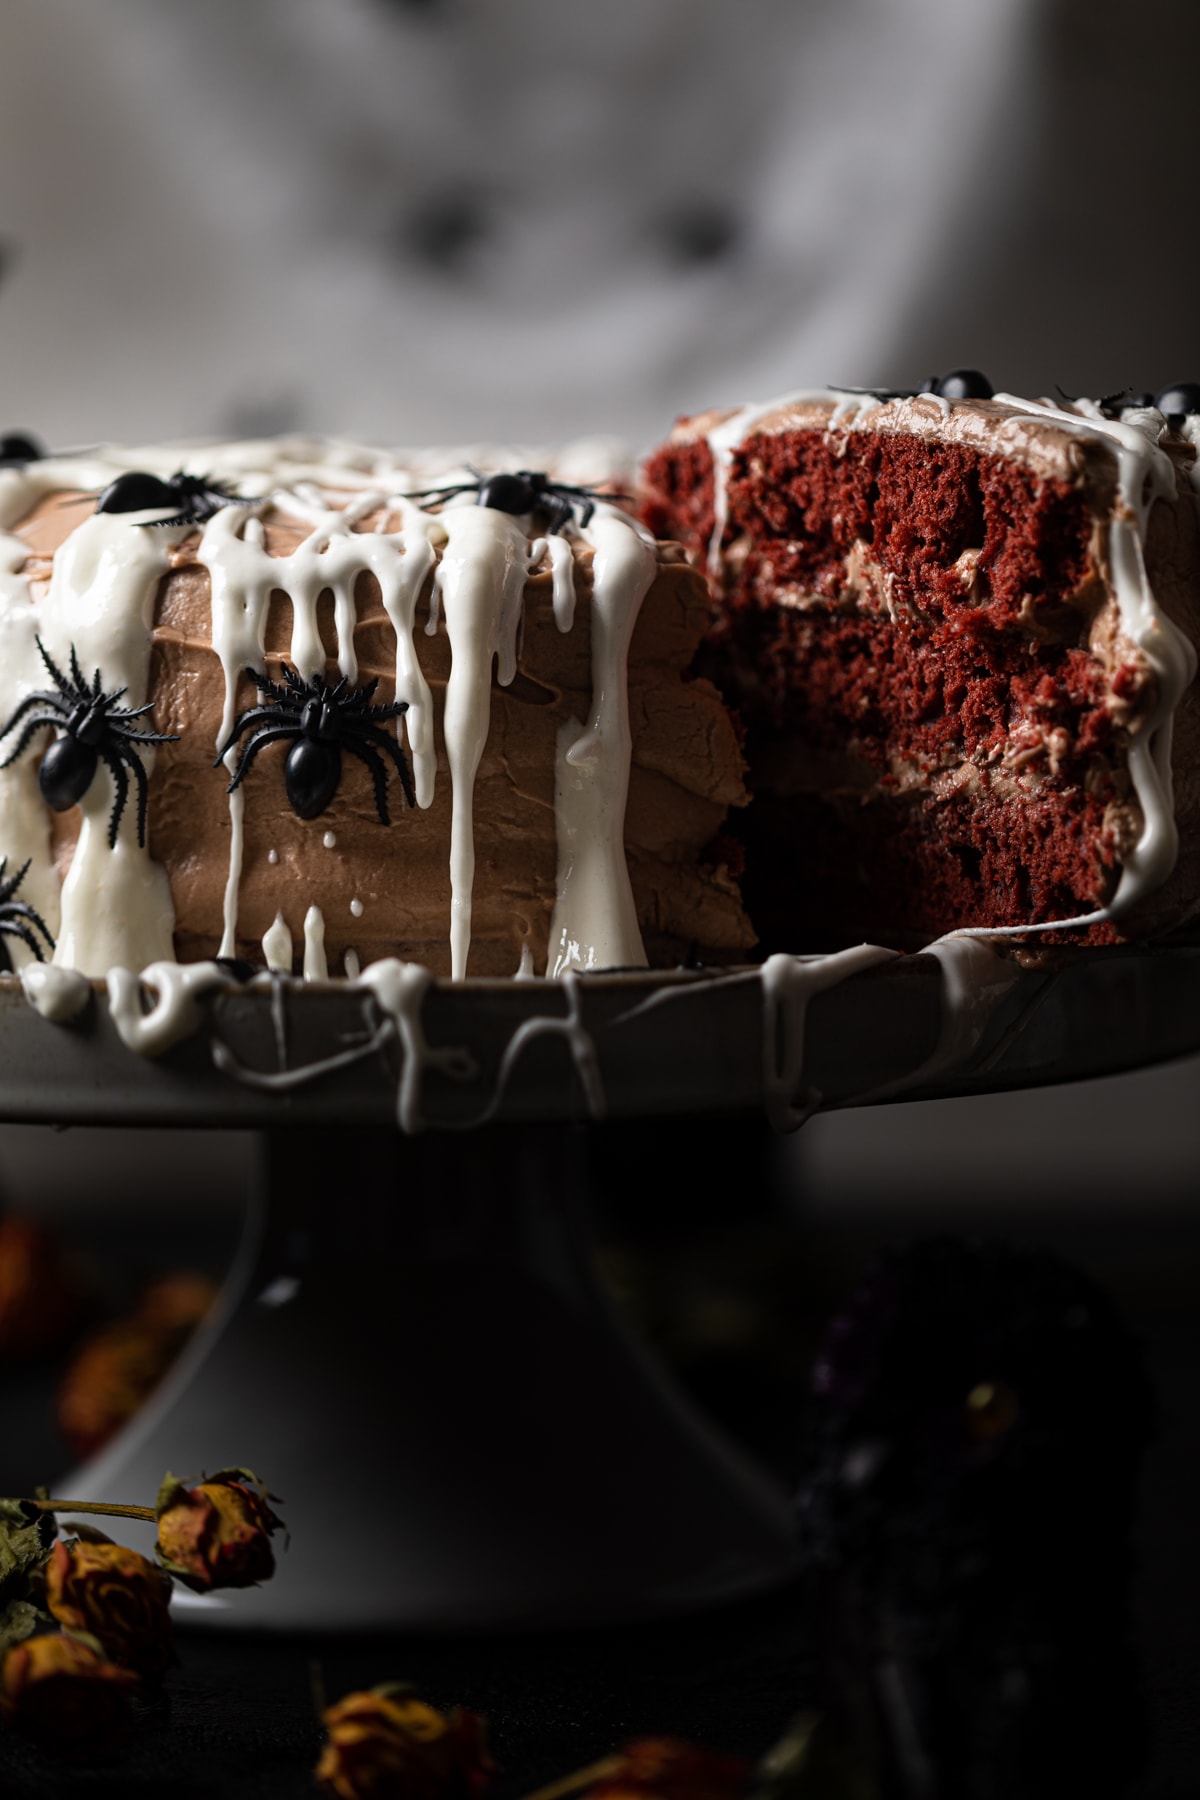 Black Widow Red Velvet Cake with a slice pulled out